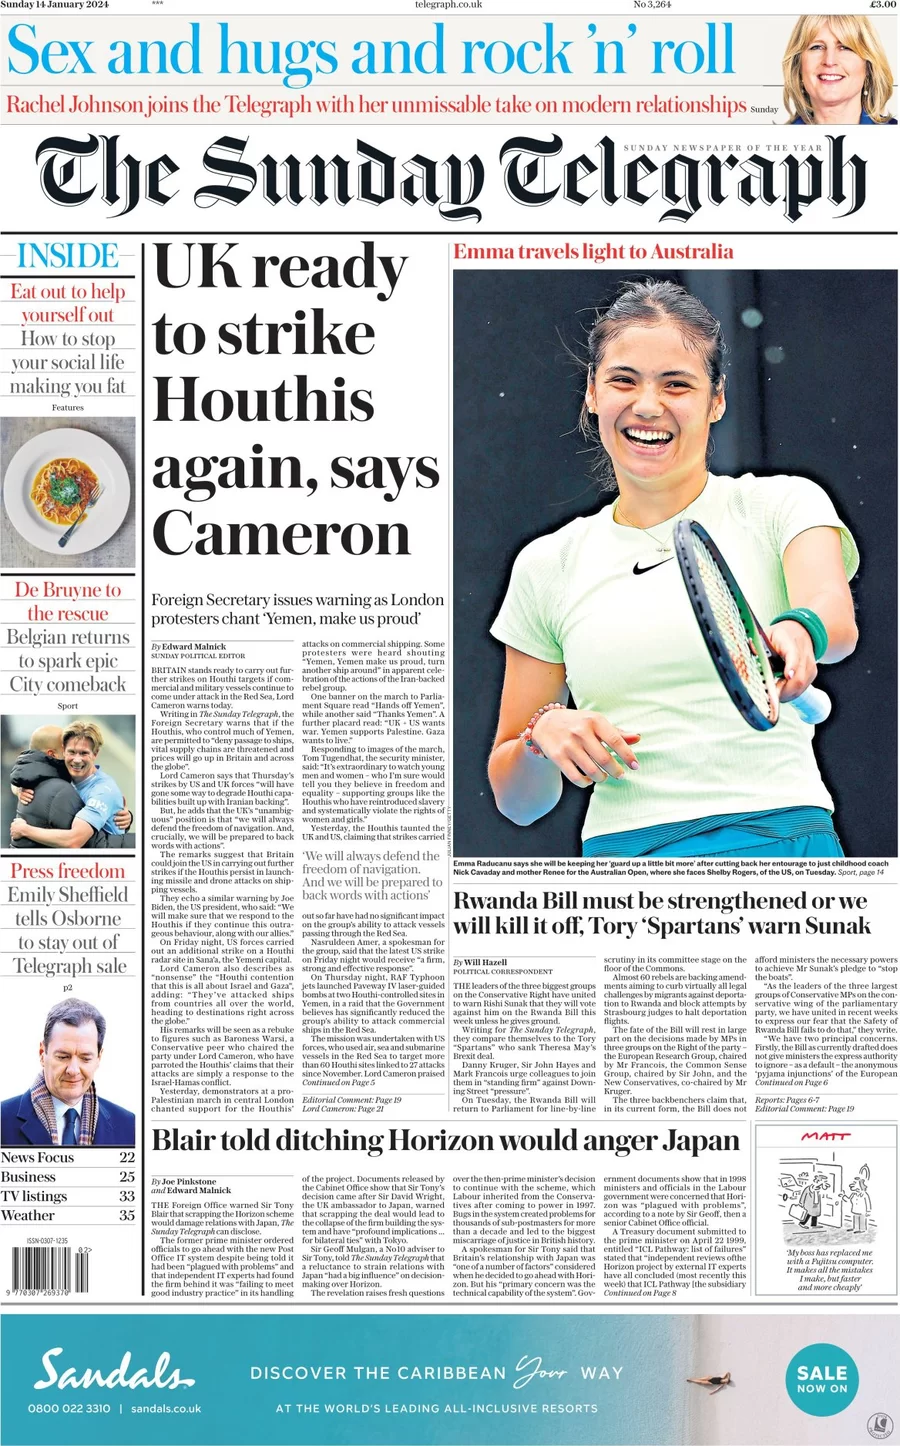 Sunday Papers - Israel-Gaza ‘100 days of hell’ - the full perspective